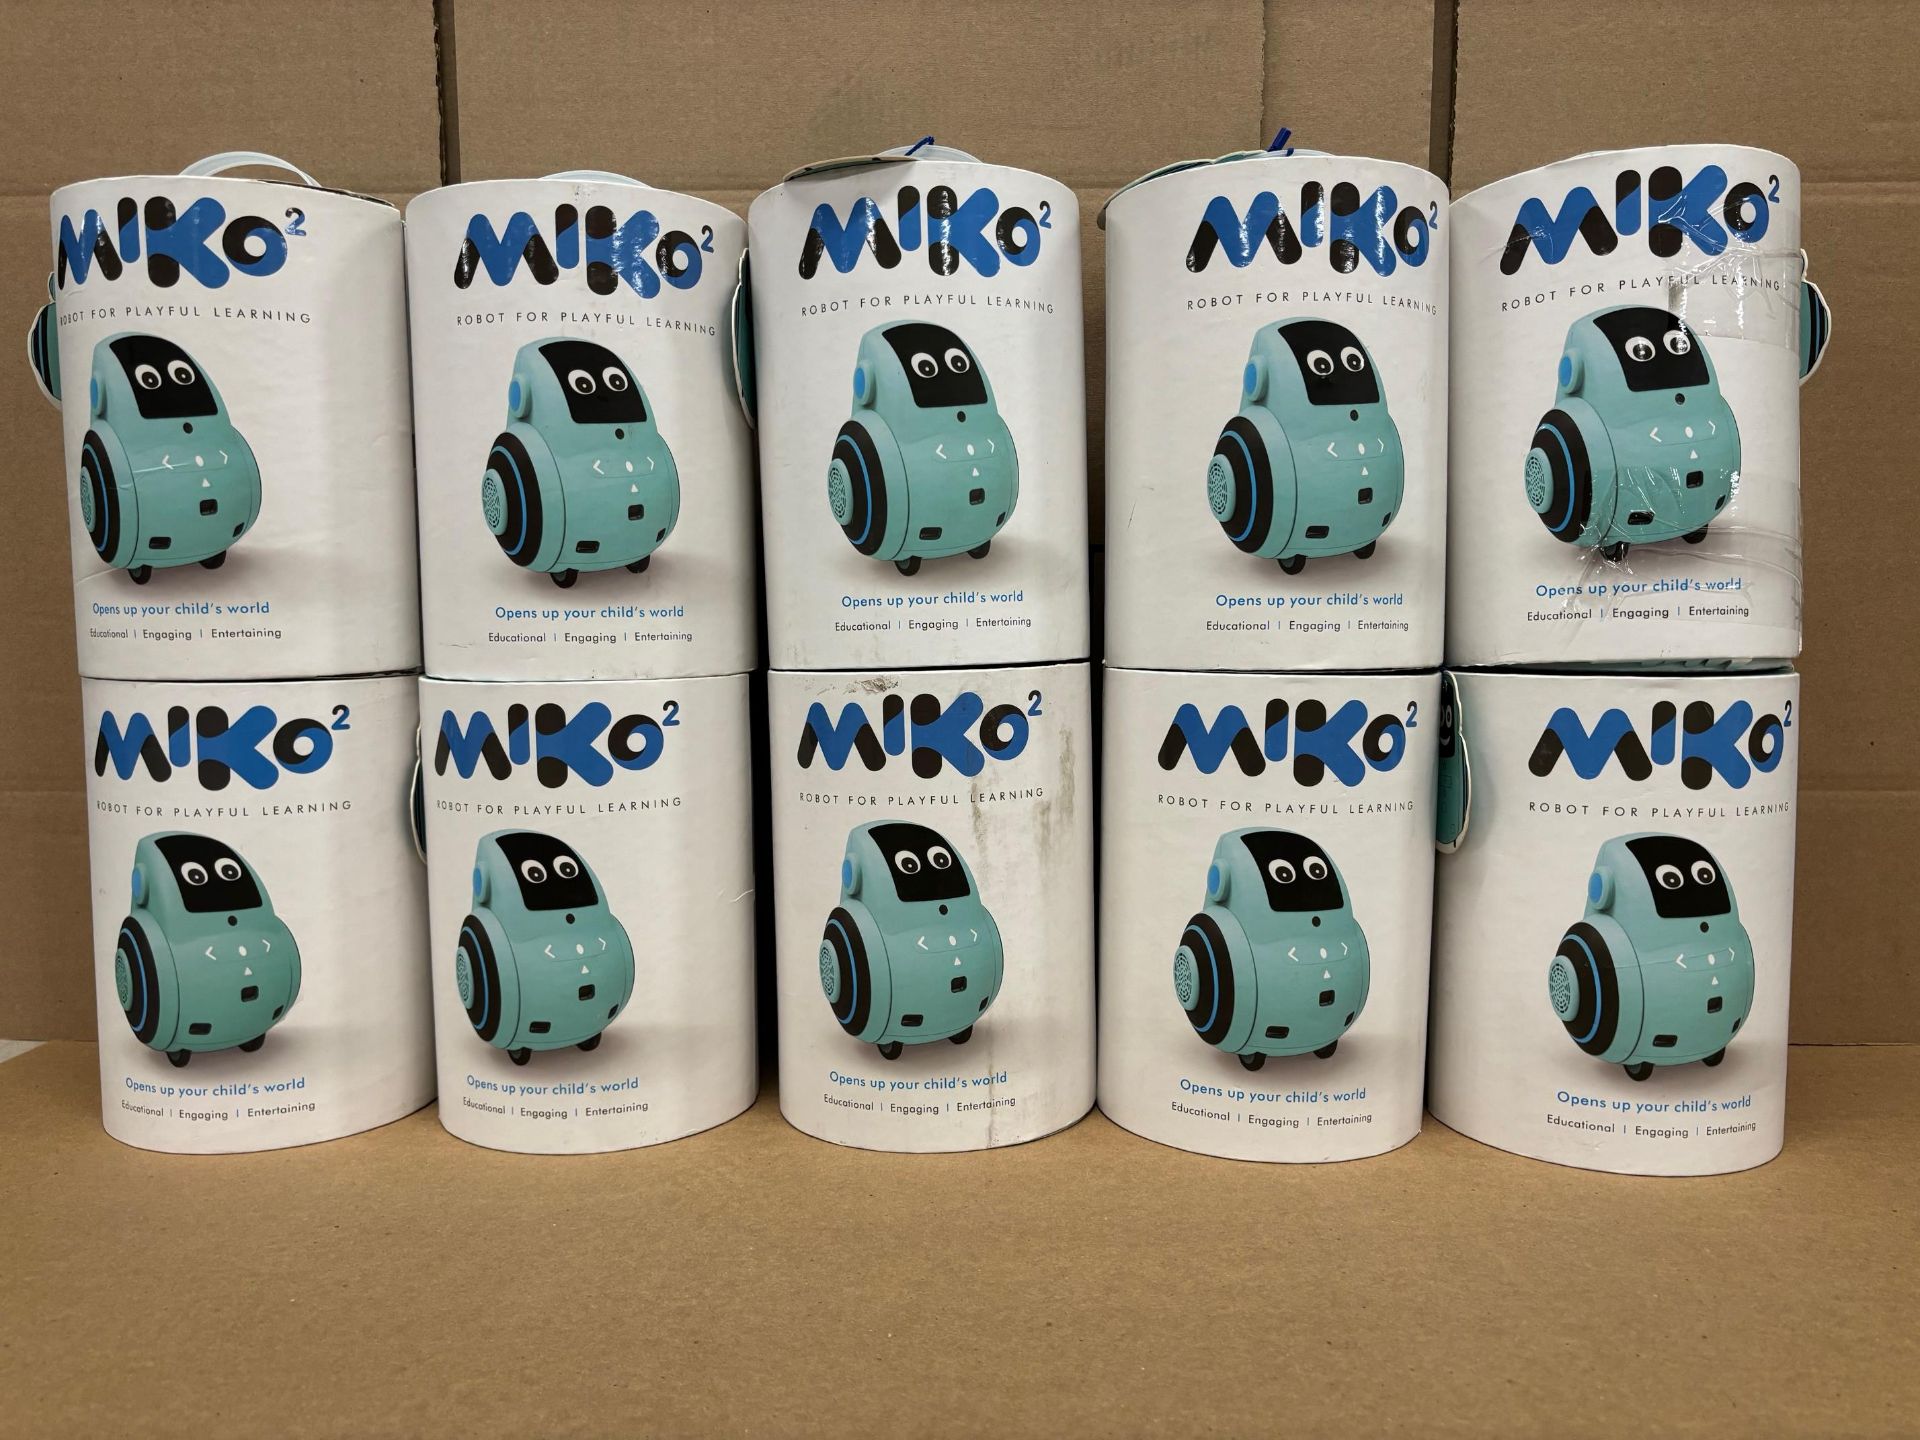 LOT - MIKO 2 ROBOT FOR PLAYFUL LEARNING - BLUE (10 UNITS) (UNTESTED RETURNS ) (MSRP $250 EA)